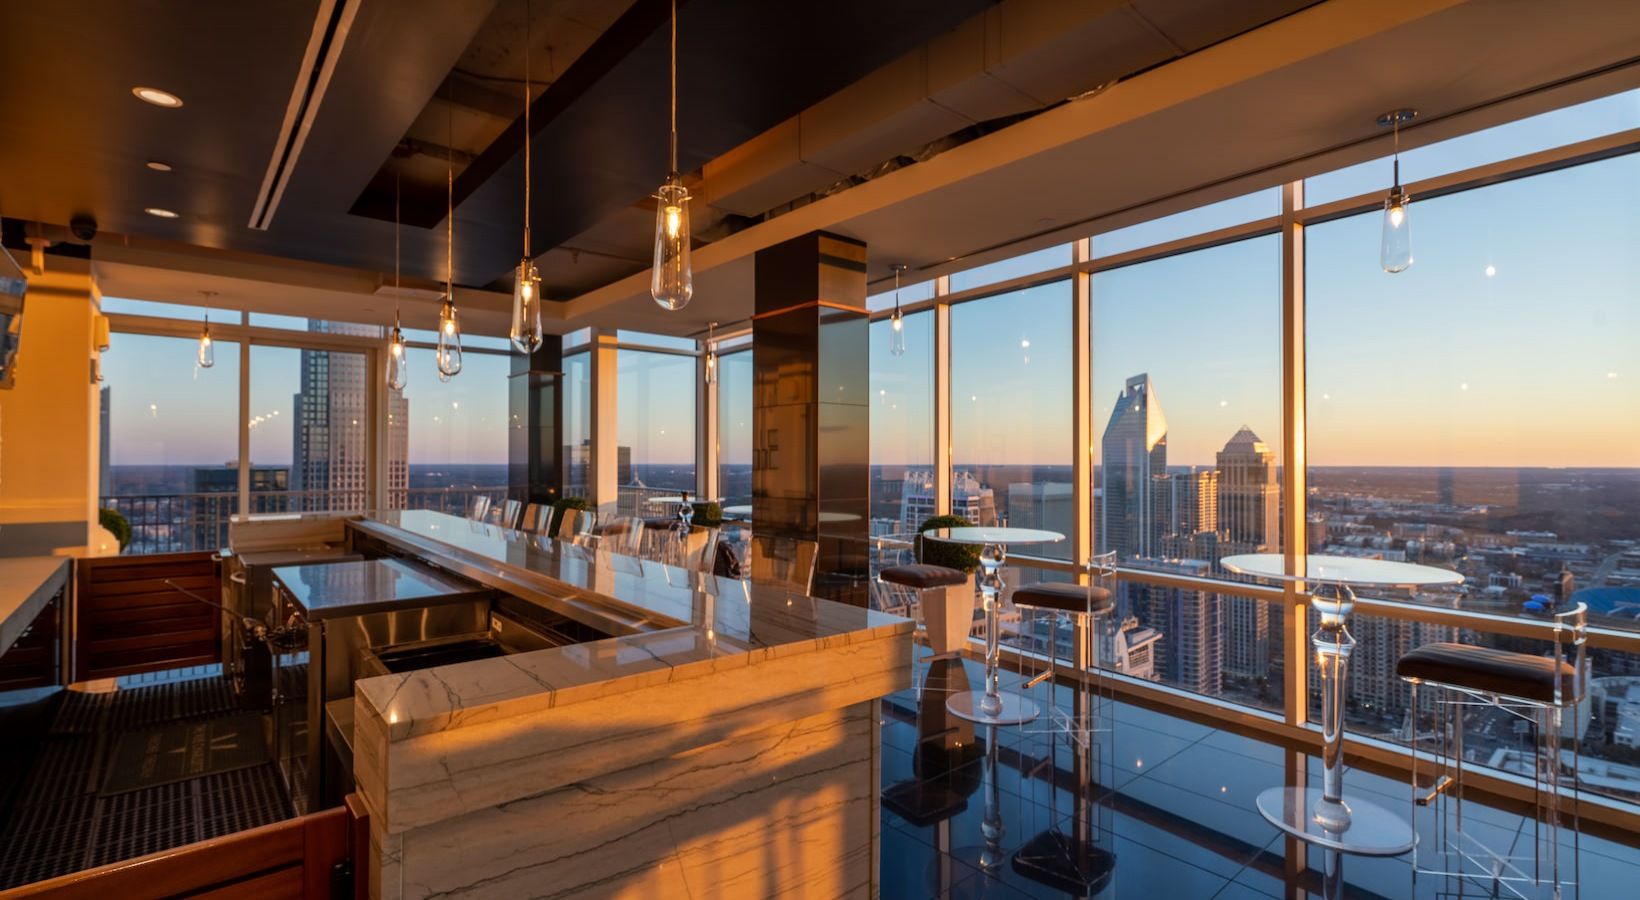 Sky Lounge at The VUE Charlotte high rise apartments overlooking the city at dusk